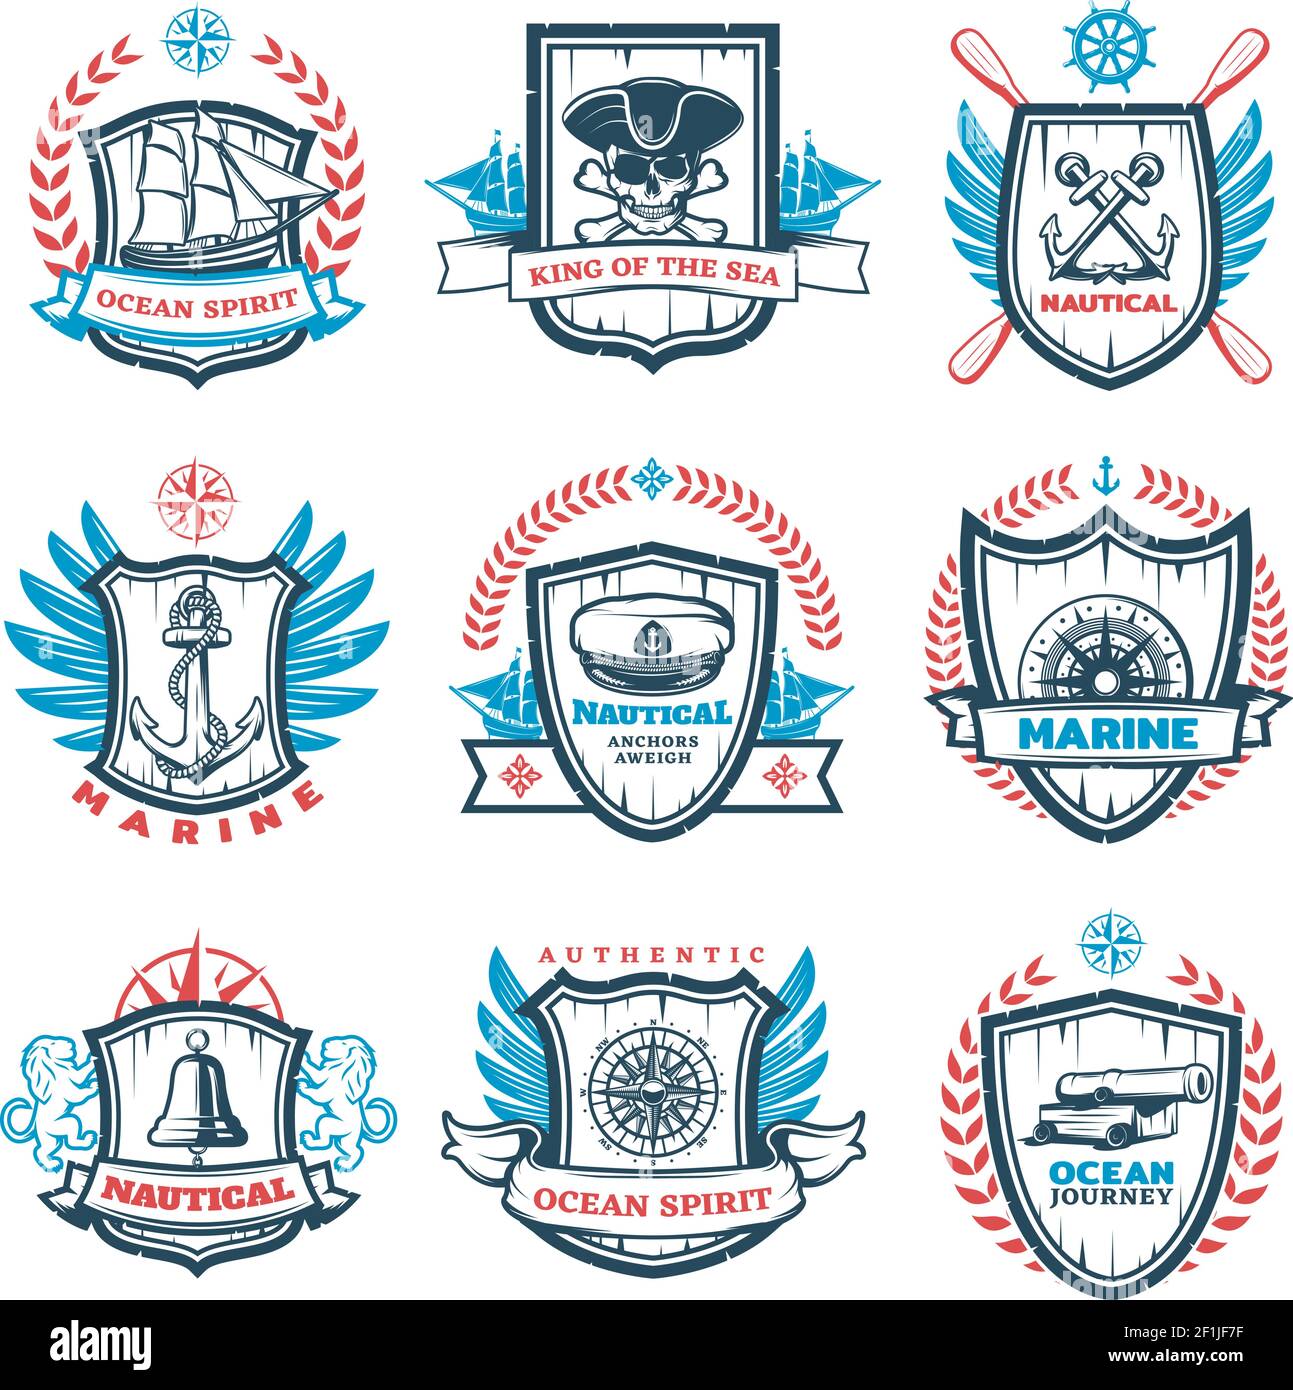 Vintage colored nautical emblems set with marine and sailing elements on heraldic shields isolated vector illustration Stock Vector